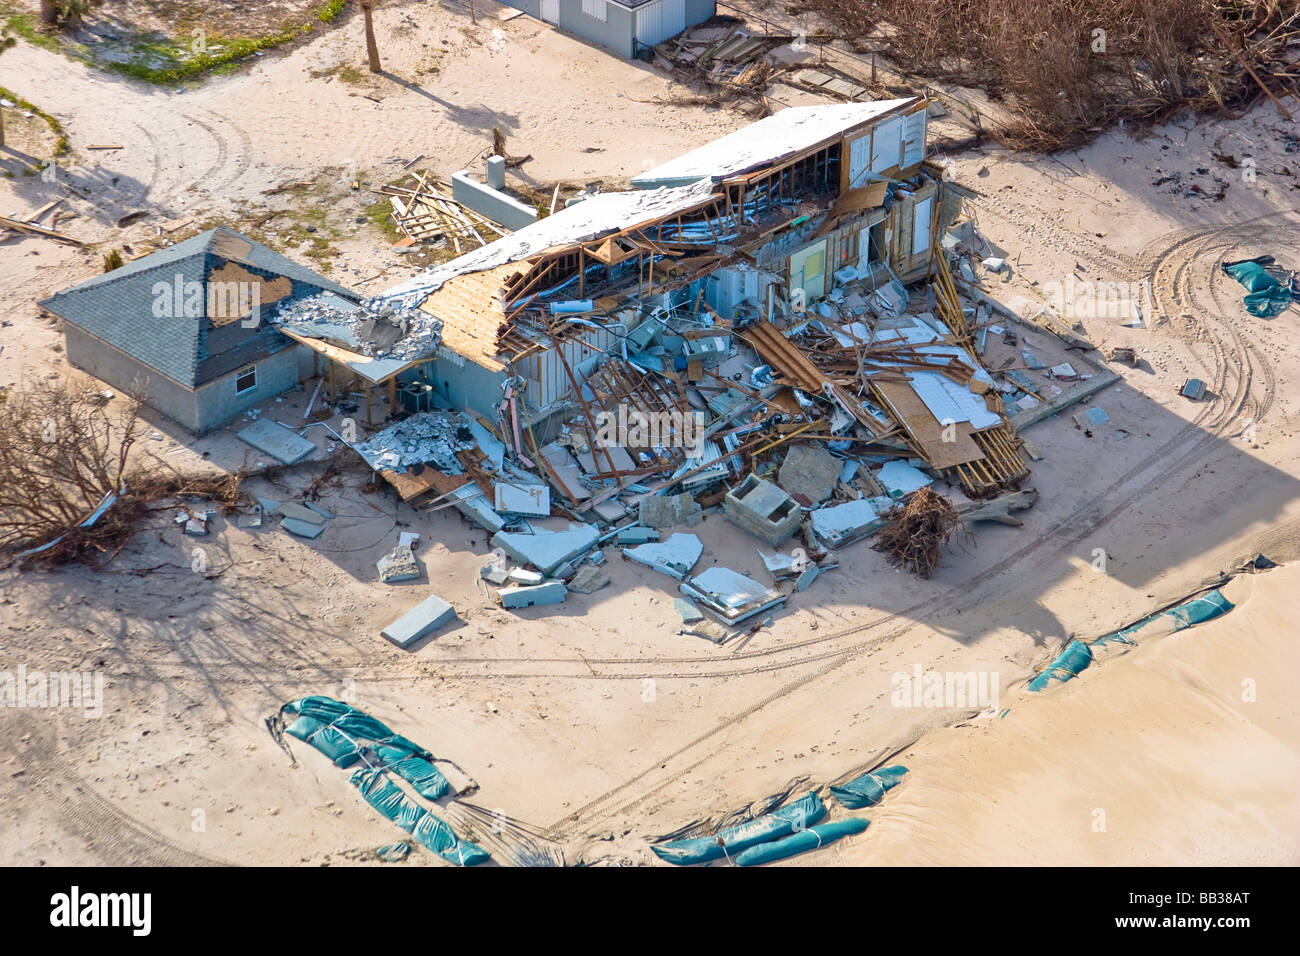 This is what's left of a home along Vero Beach, Florida following Hurricane Jeanne in 2004 Stock Photo